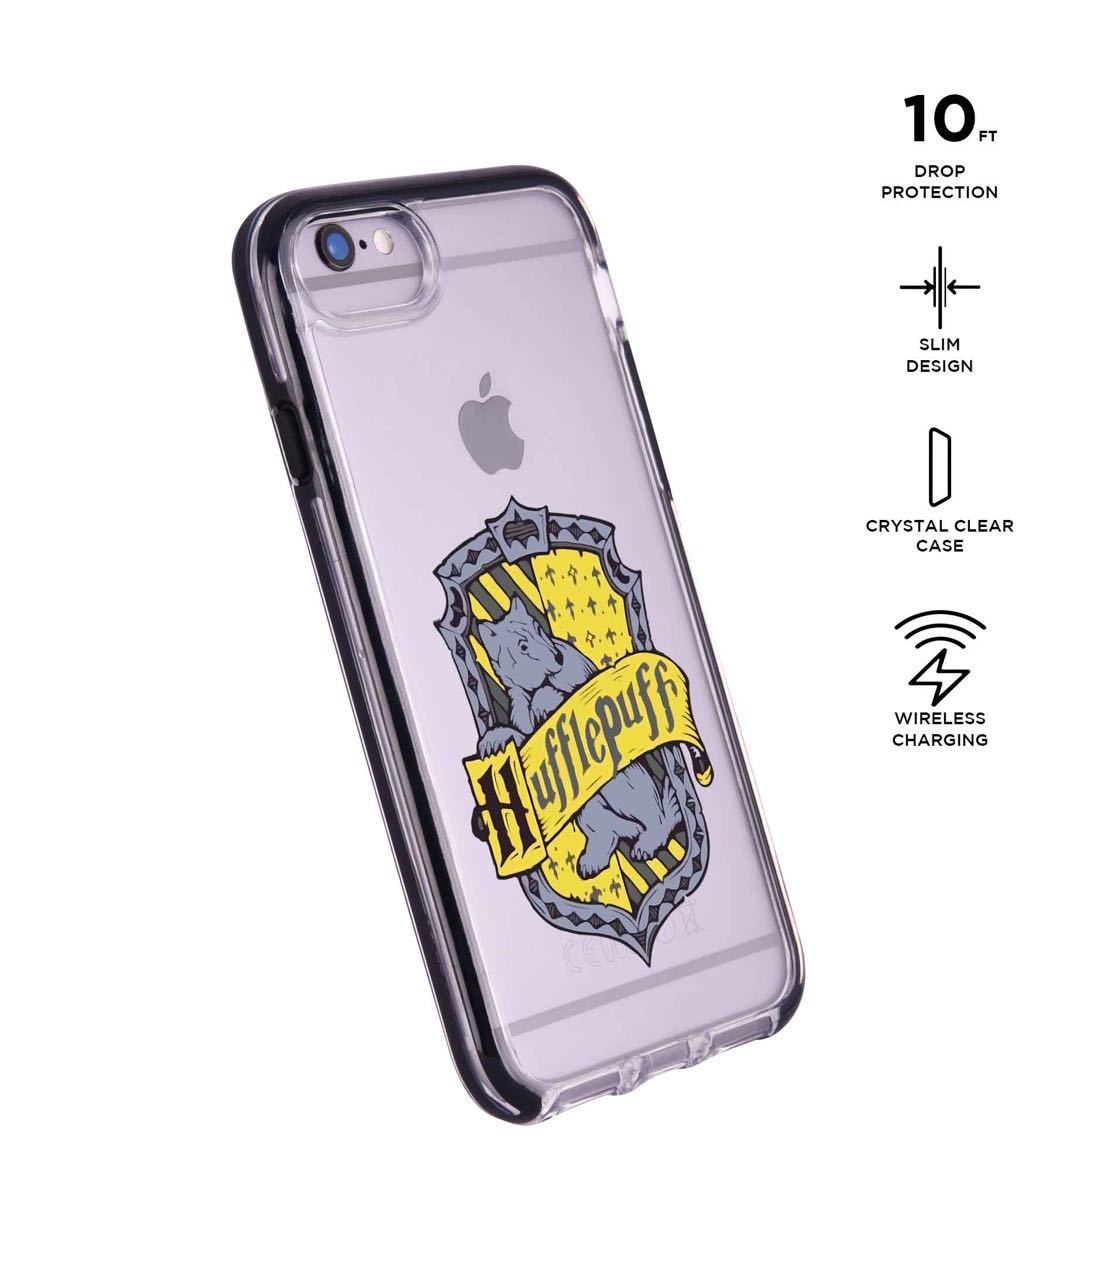 Crest Hufflepuff - Extreme Phone Case for iPhone 6S